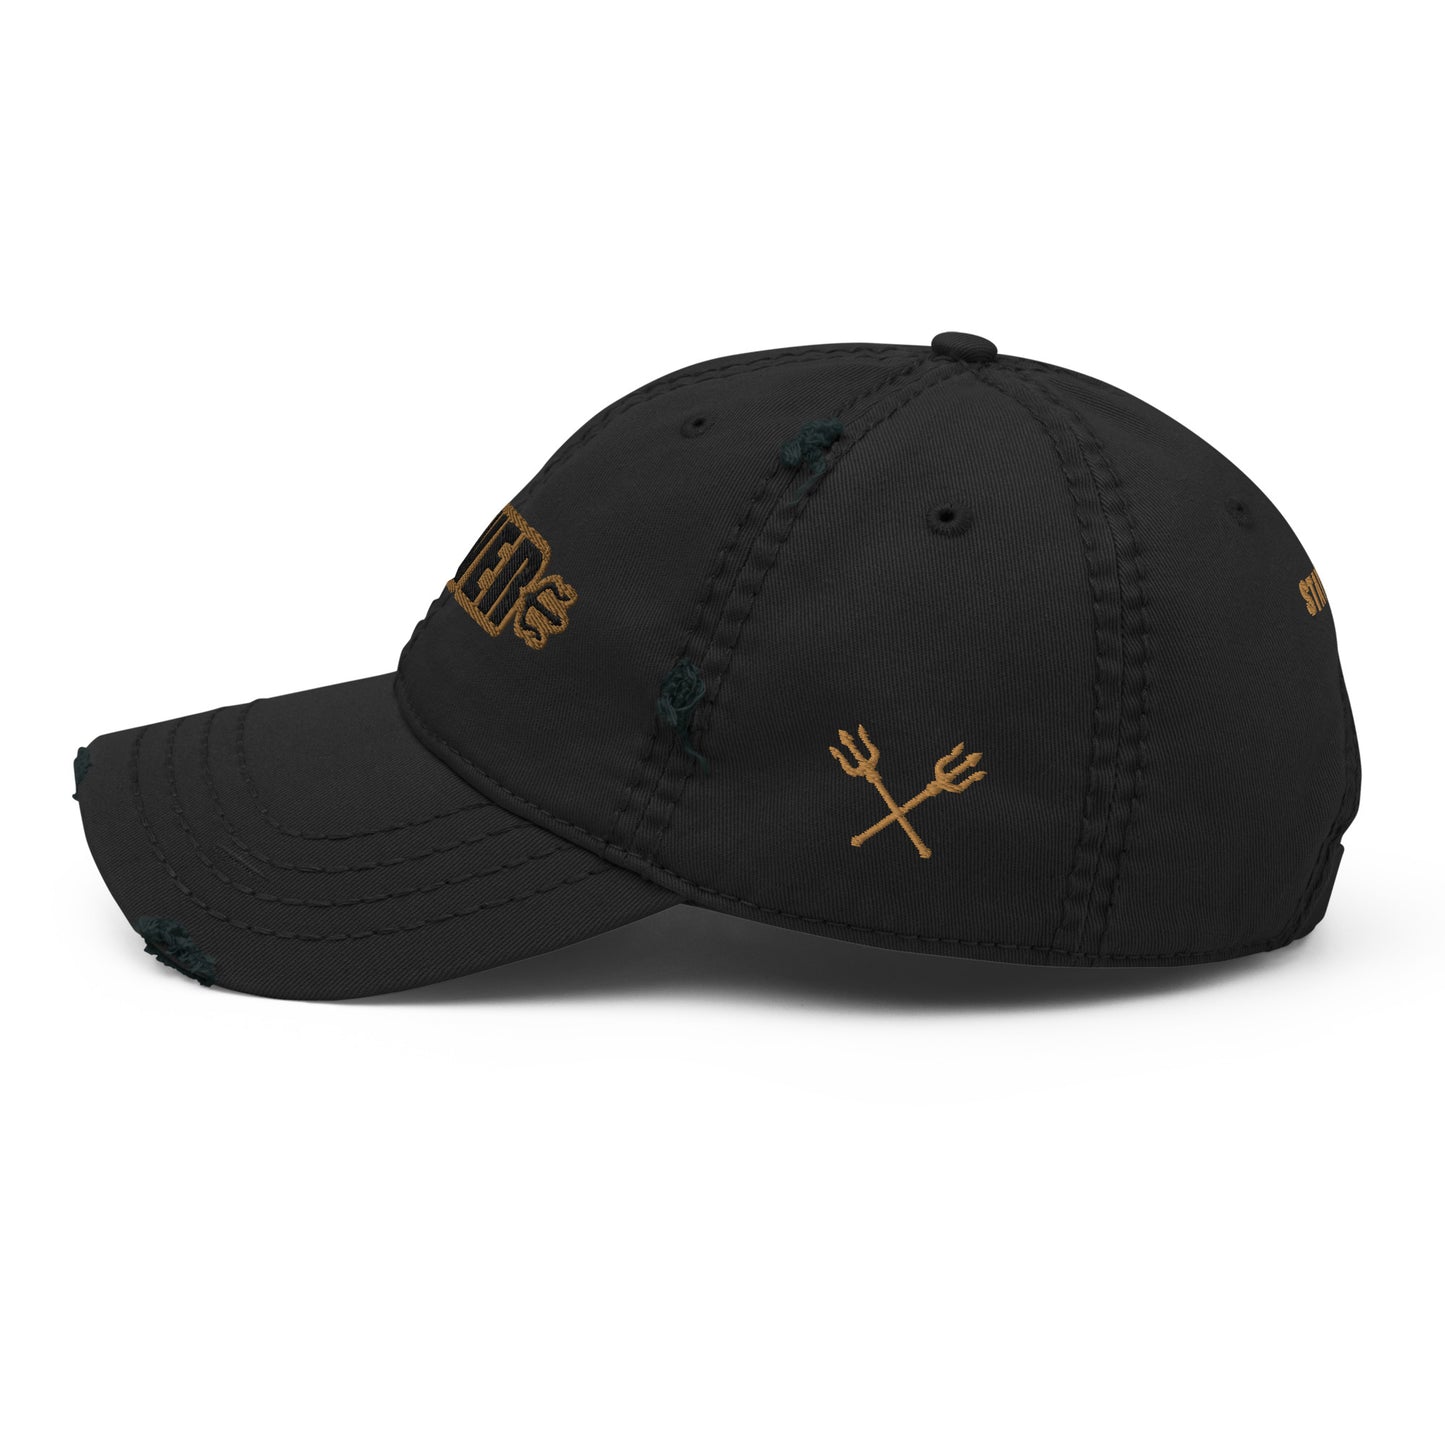 DIVER / STAY DEEP Distressed Dad Hat